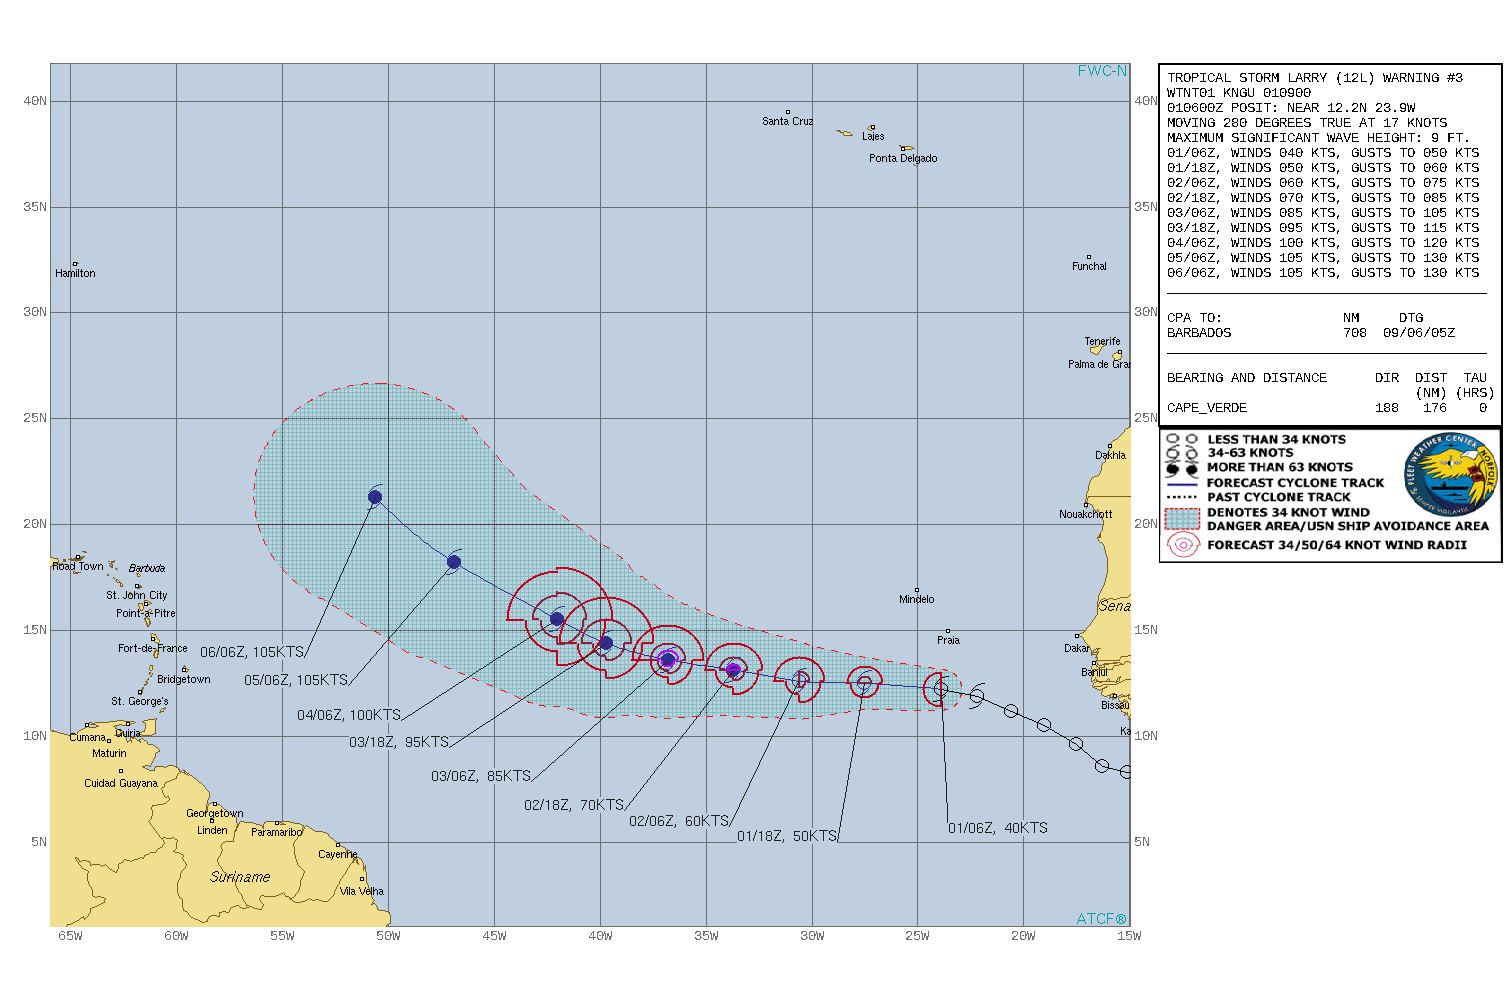 TS 12L(LARRY). WARNING 3 ISSUED AT 01/09UTC. CURRENT INTENSITY IS 40KNOTS: FORECAST TO REACH 70KNOTS/CAT 1 BY 02/18UTC AND 100KNOTS/CAT 3 BY 04/06UTC.